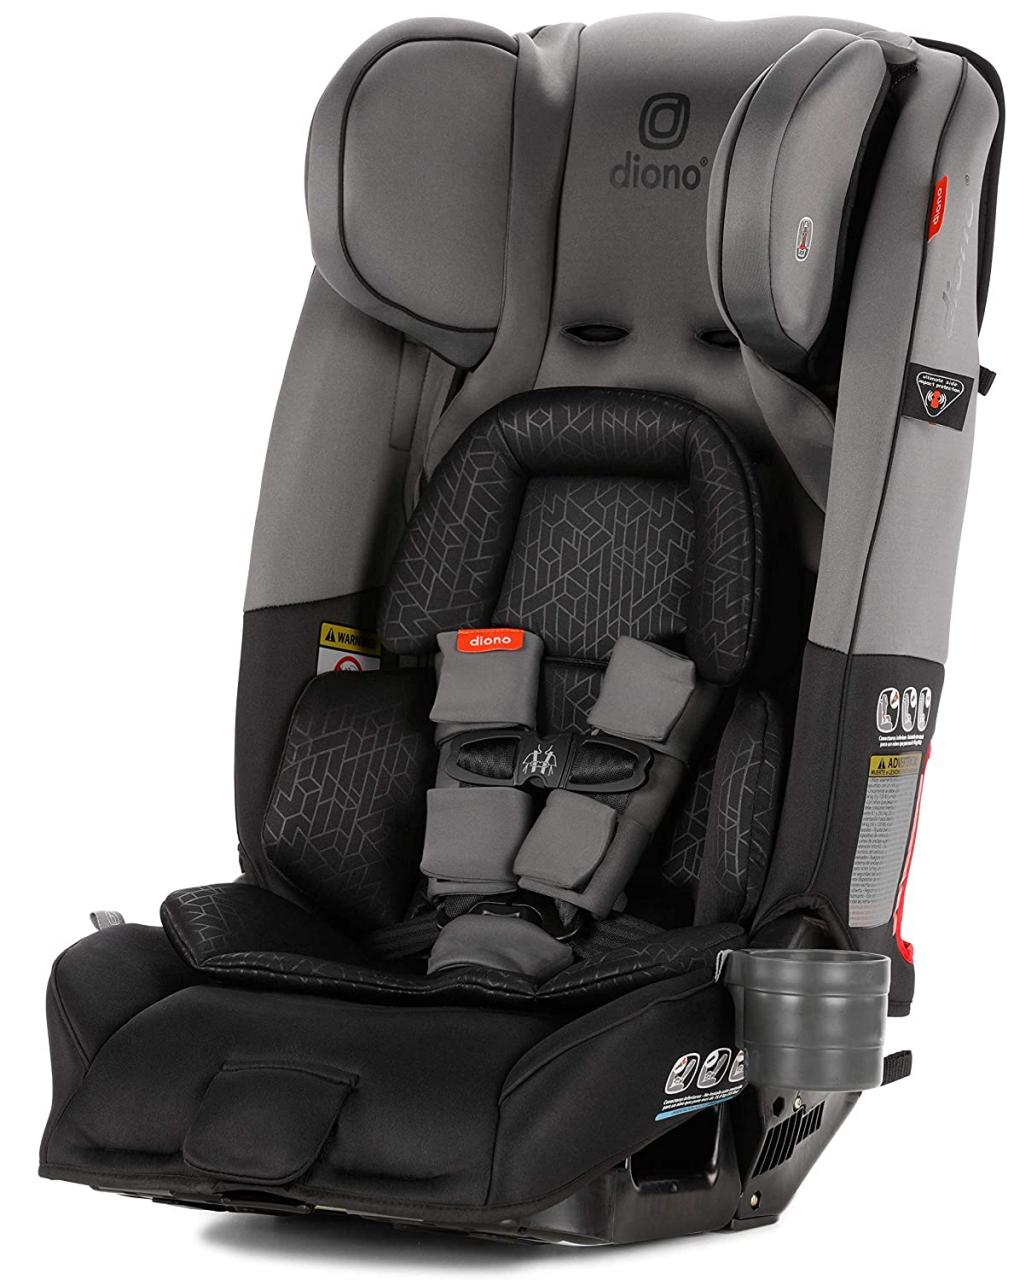 Buy Diono 2019 Radian 3RXT All-in-One Convertible Car Seat Online in Hong  Kong. B07DWBZP44